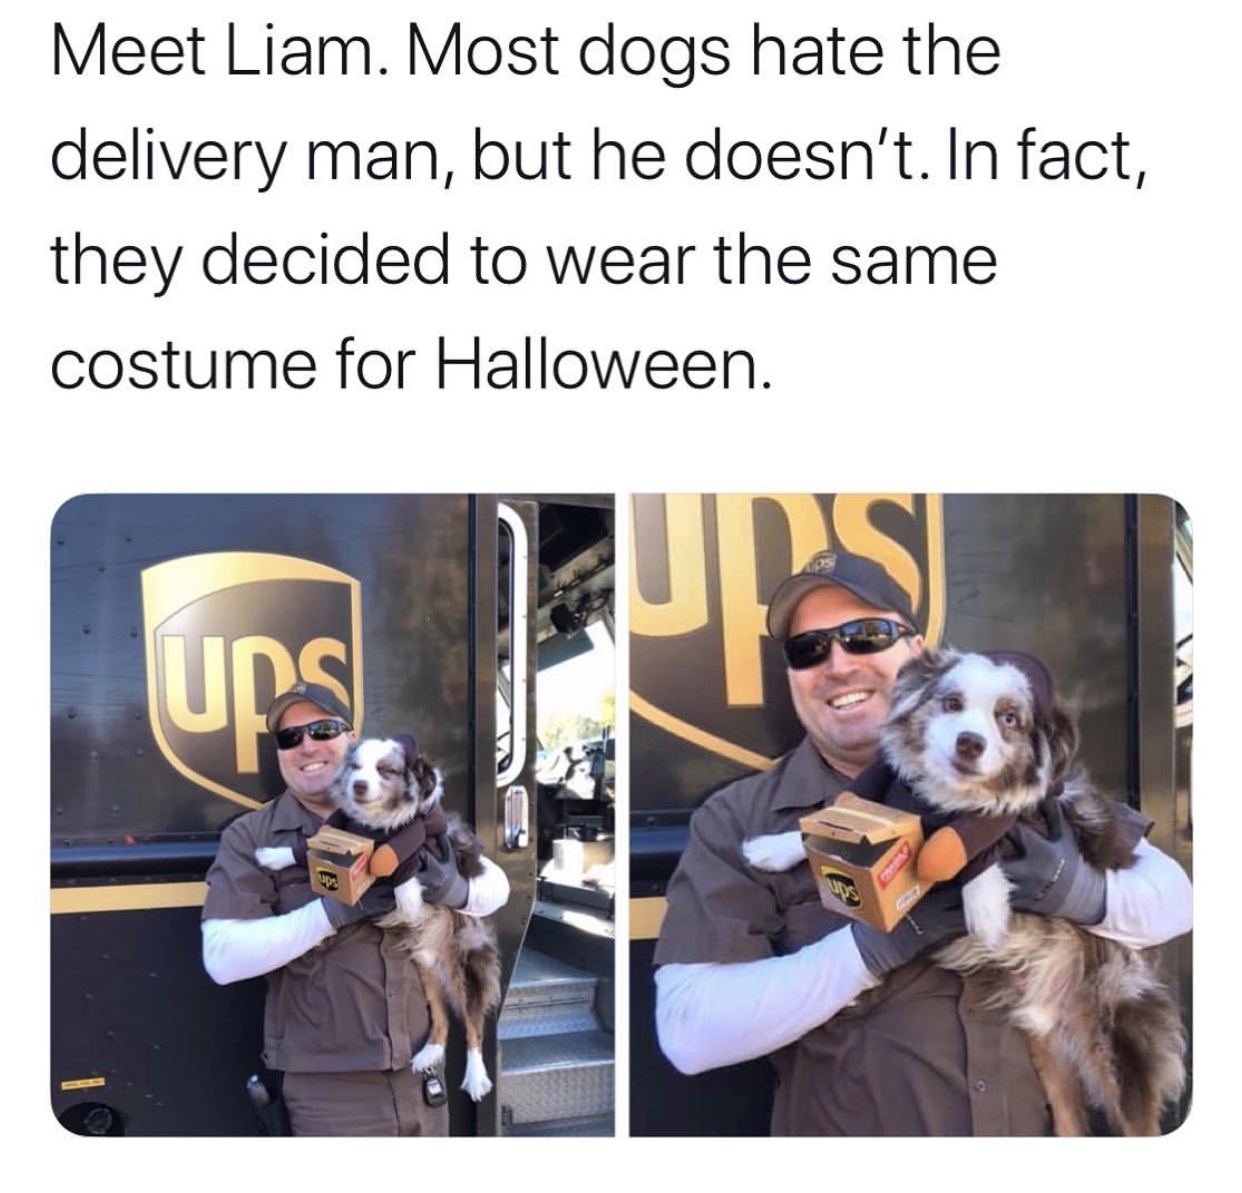 united parcel service - Meet Liam. Most dogs hate the delivery man, but he doesn't. In fact, they decided to wear the same costume for Halloween.